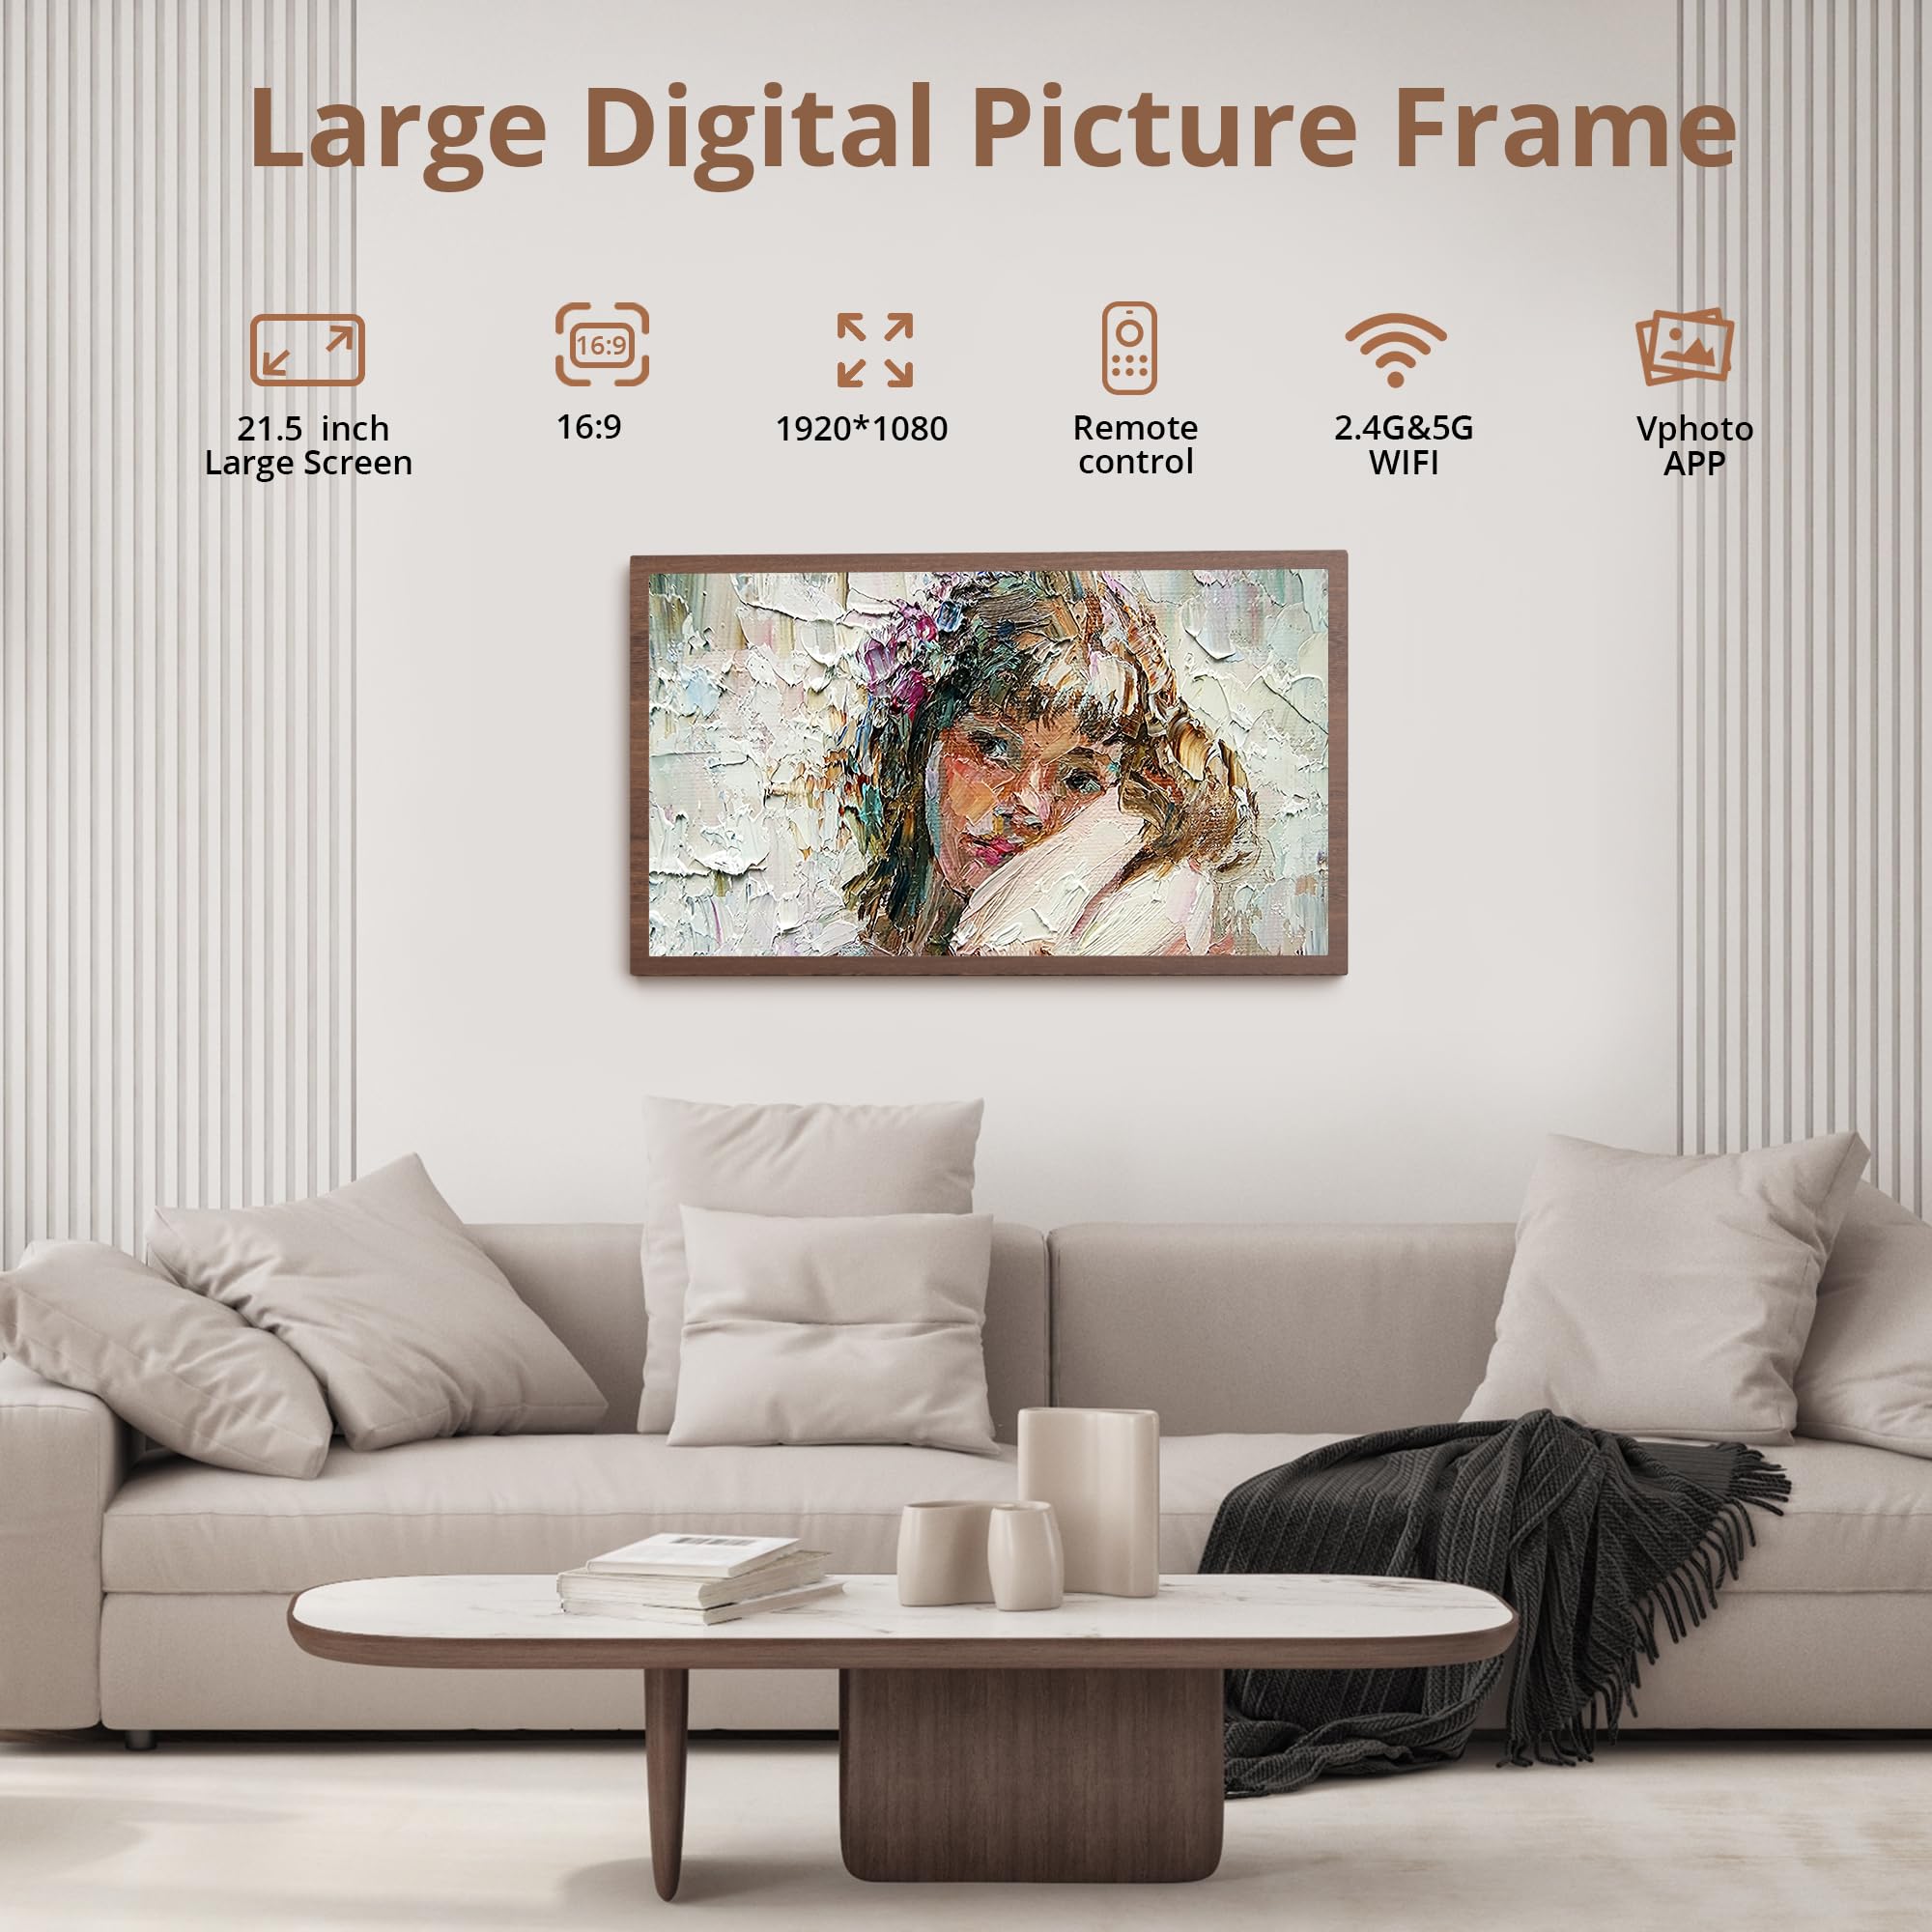 Dragon Touch Digital Picture Frame 21.5 inch Screen WiFi Digital Photo Frame Display, 32GB Storage, Auto-Rotate, Share Photos via App, Email, Cloud, Classic 21